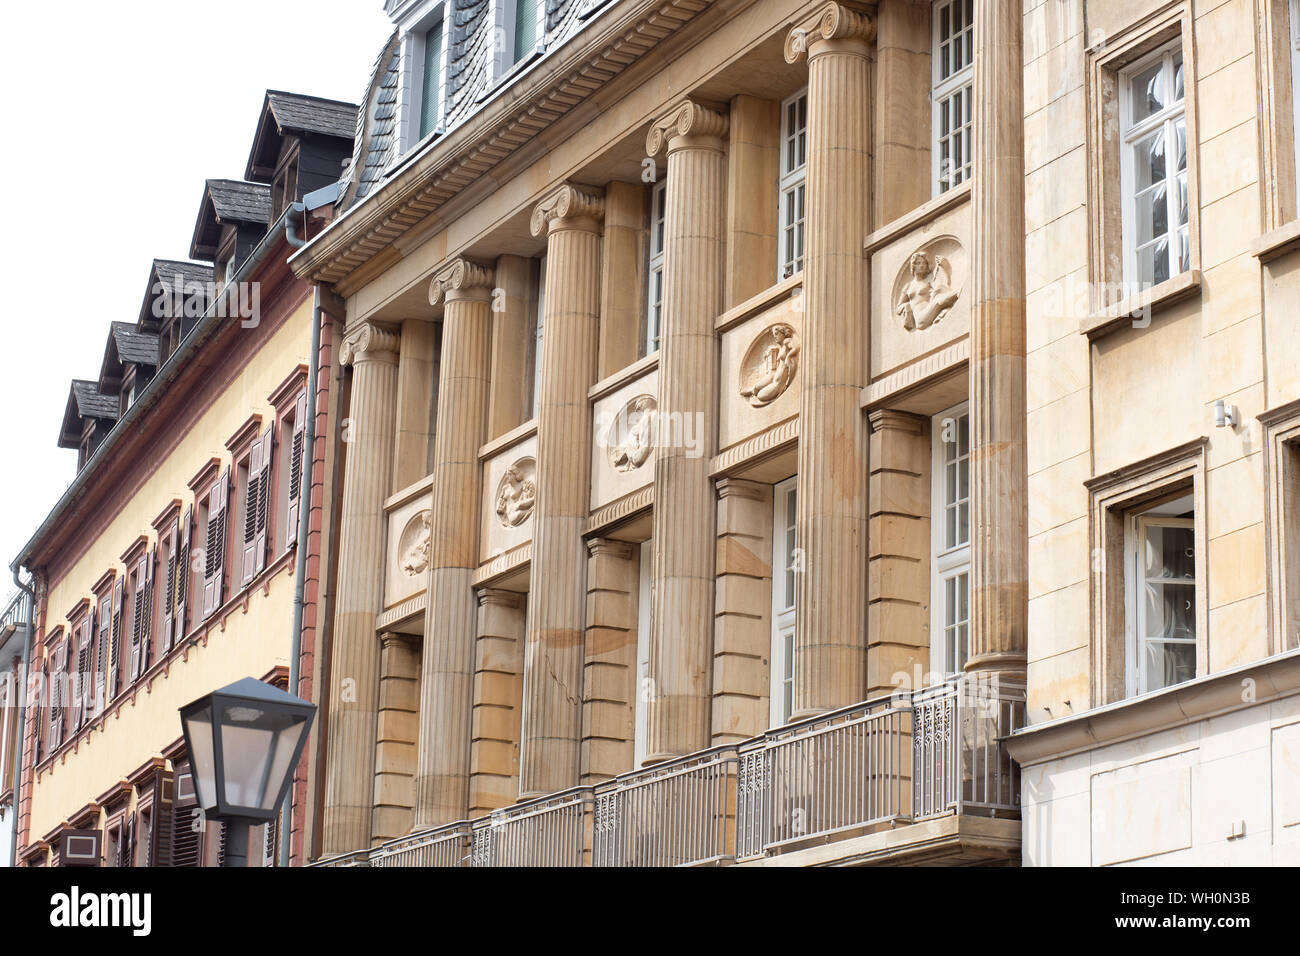 Heidelberg, Baden Württemberg / Germany / Detail of Old Building with Hand Made Statues Stock Photo